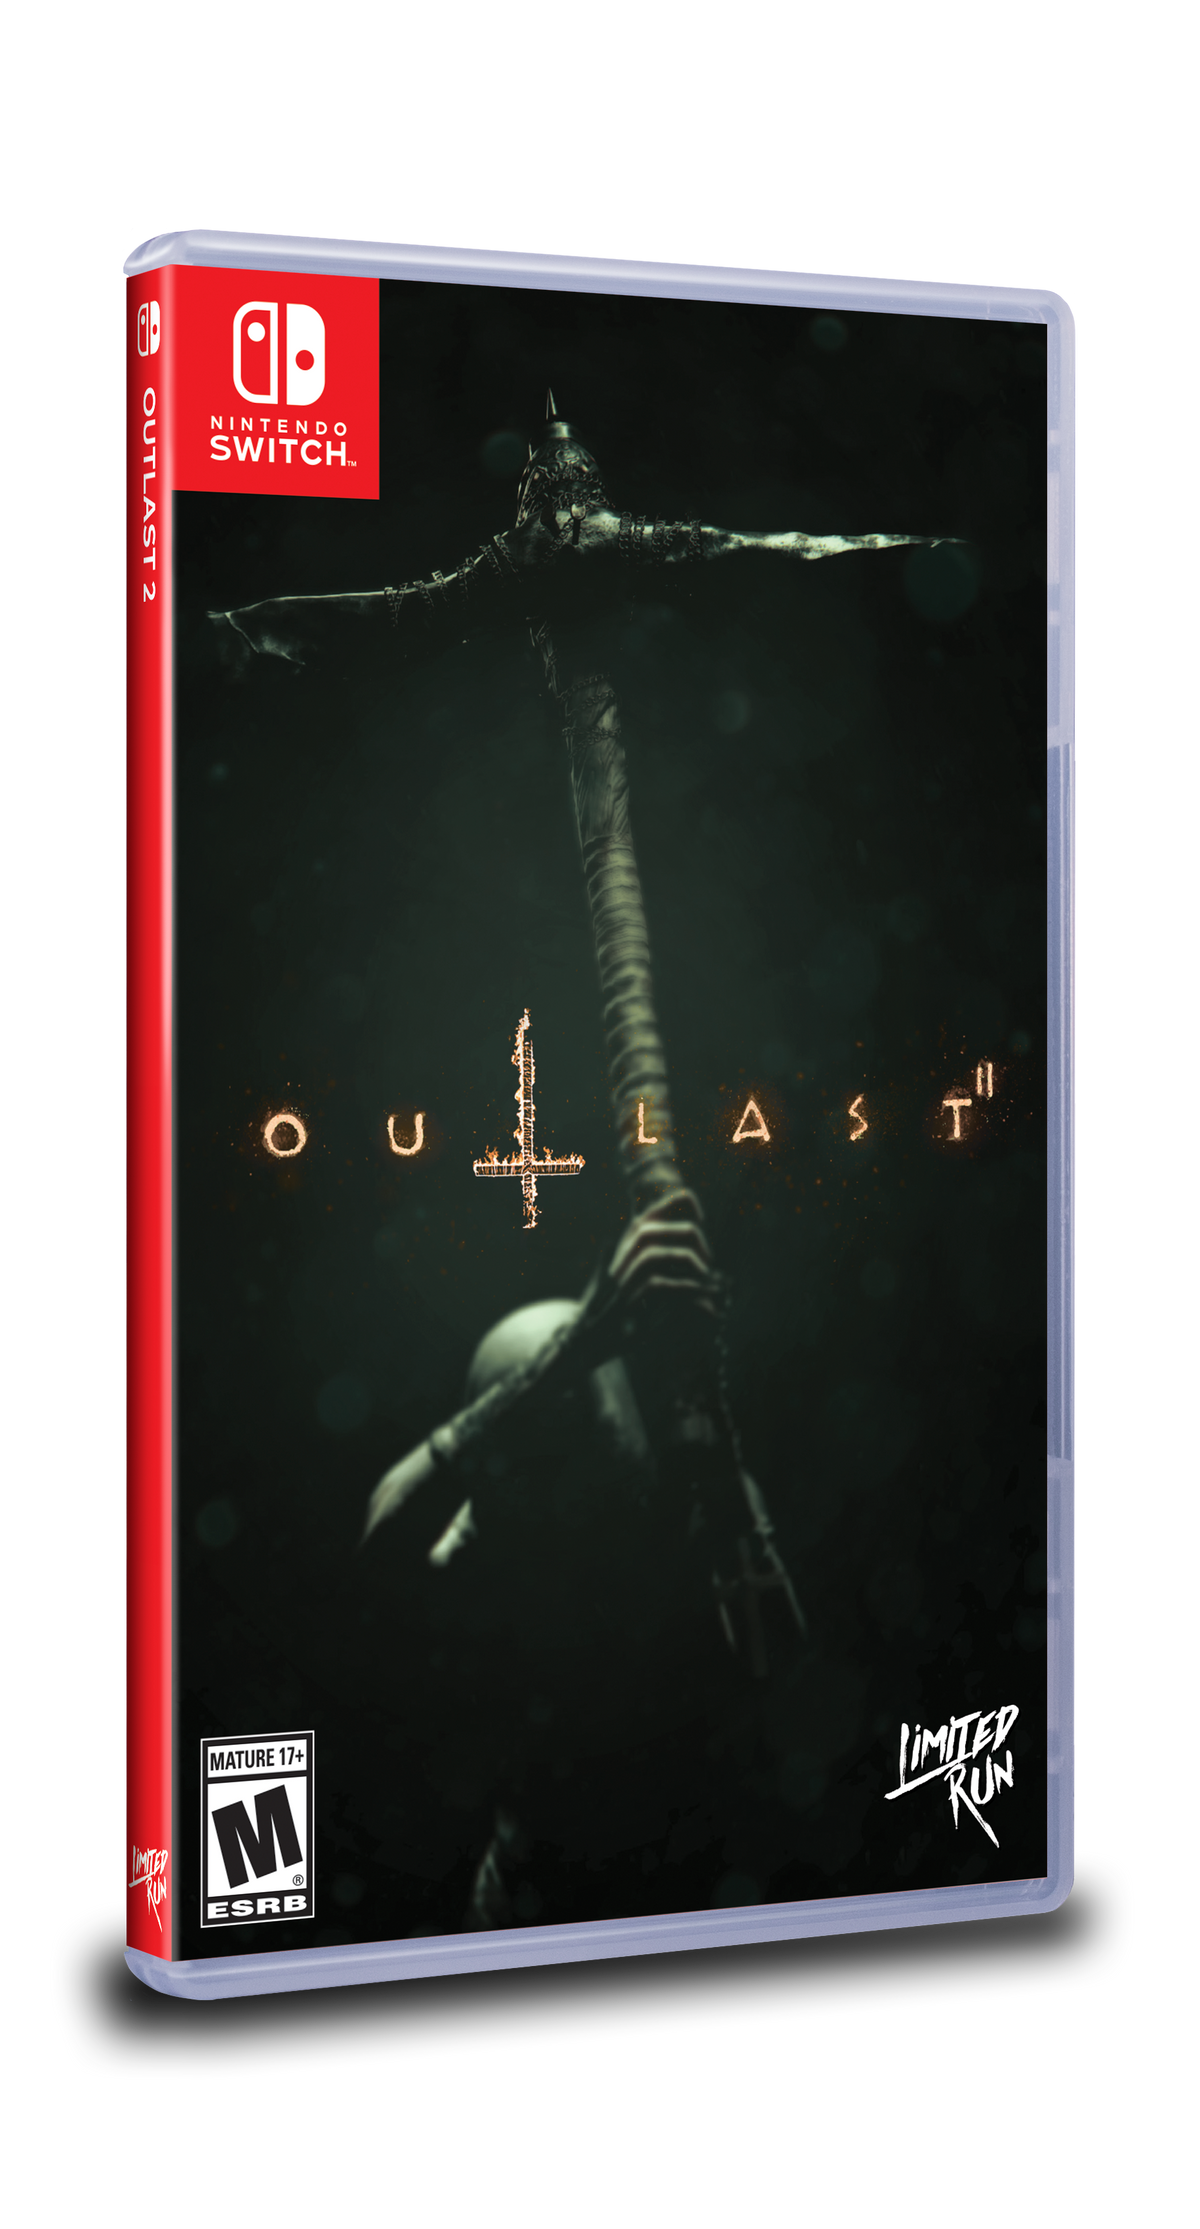 Switch Limited Run #18: Outlast 2